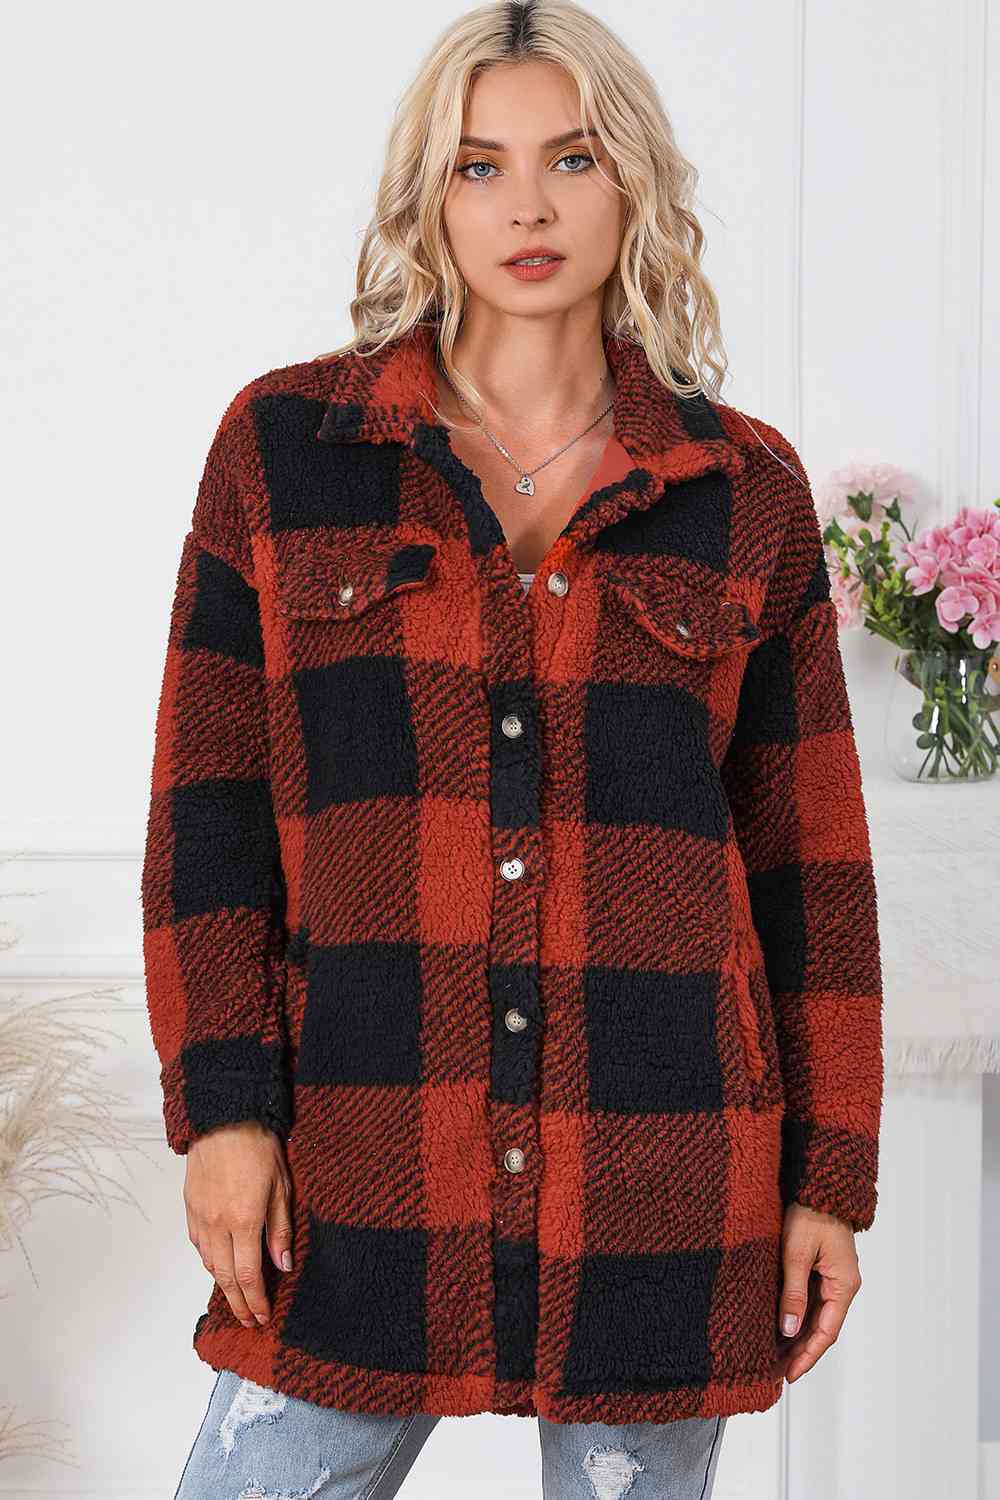 Black Plaid Button Down Coat with Pockets Sentient Beauty Fashions jackets